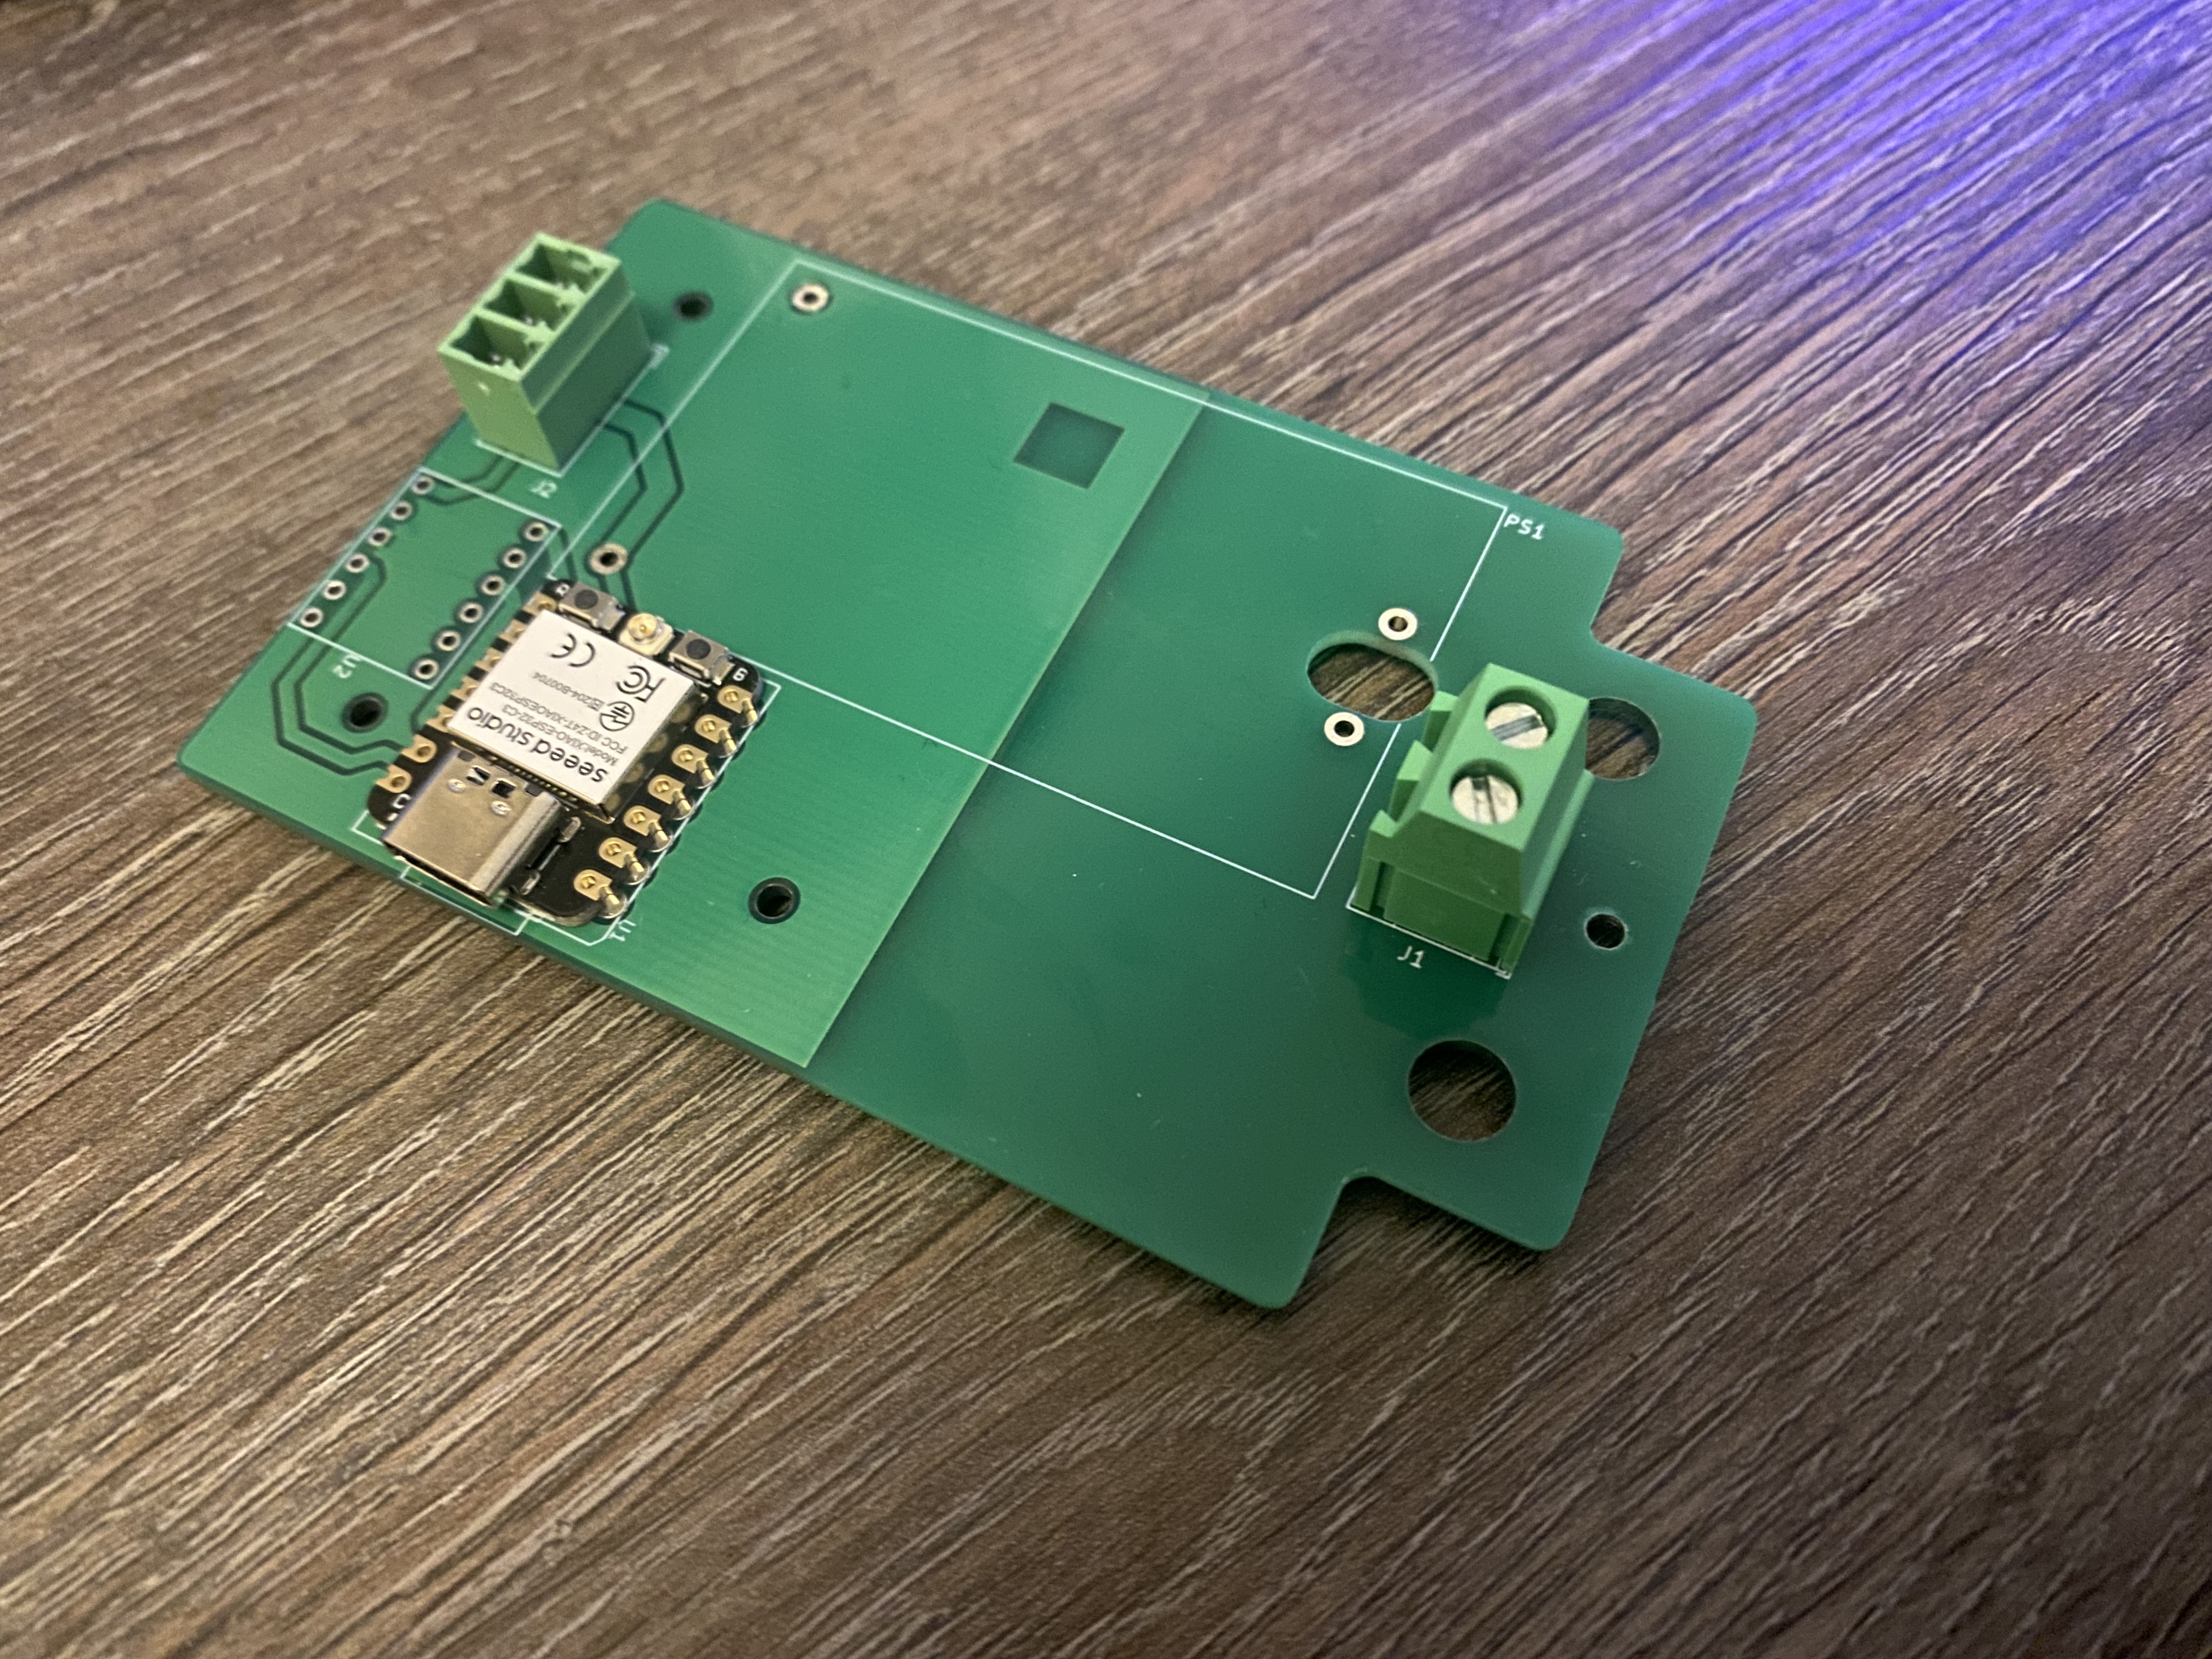 A partially assembled PCB with a XIAO ESP32-C3 already in place